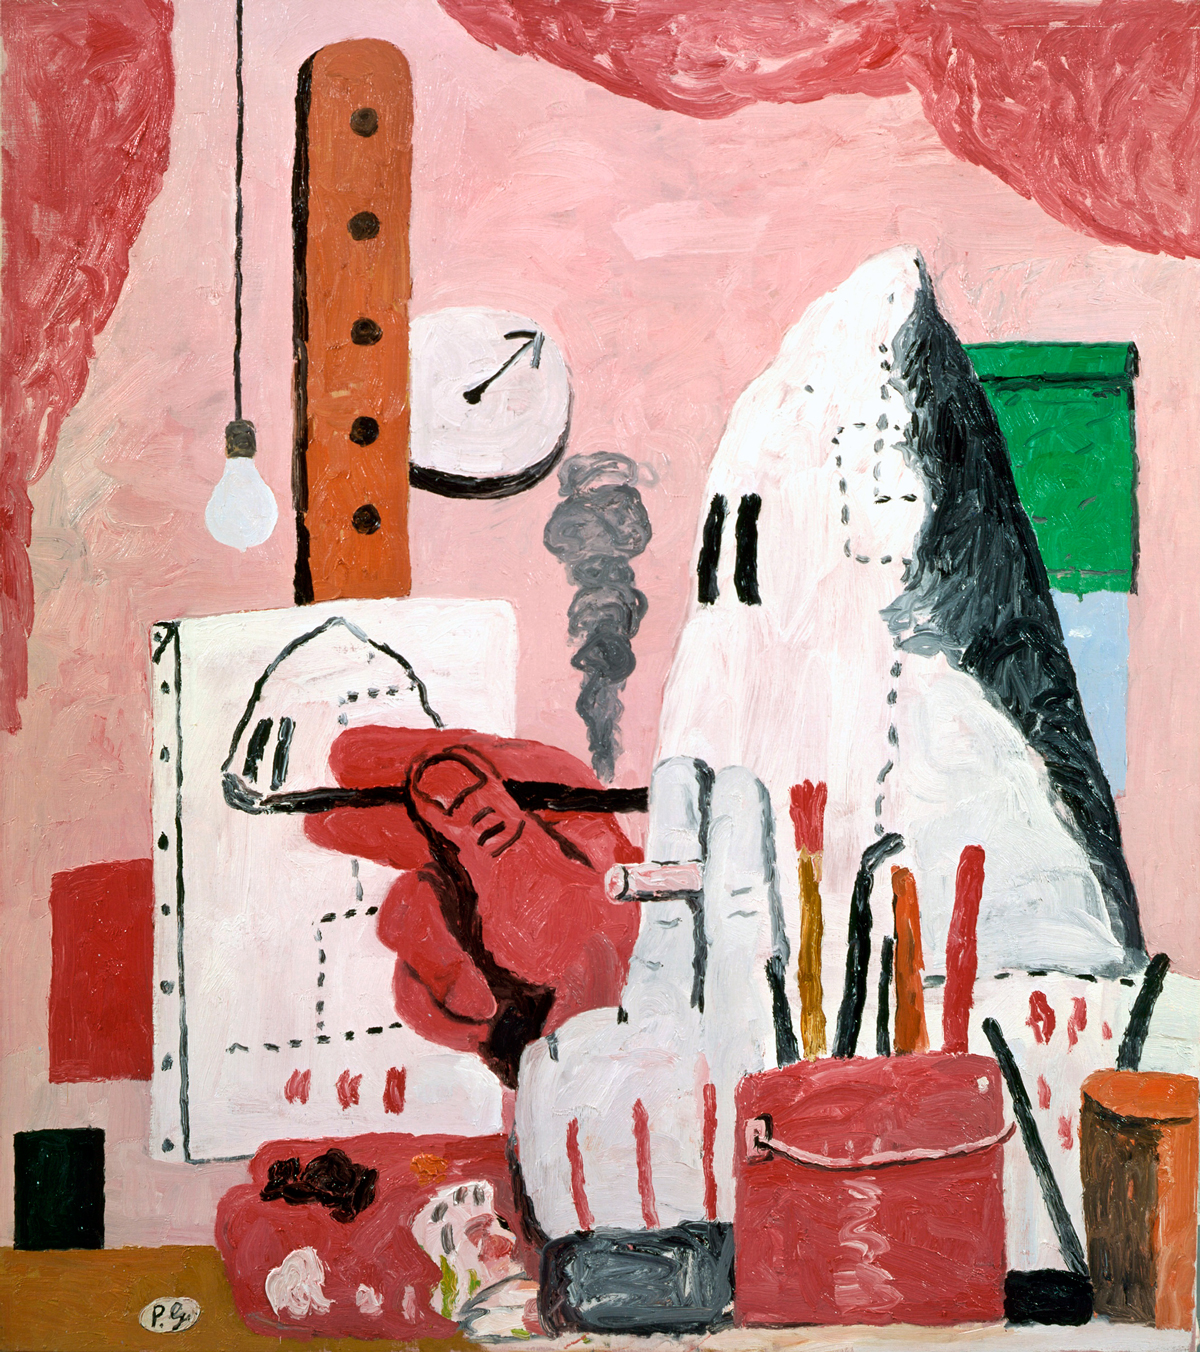 In the Studio (1969) by Philip Guston. As reproduced in Painting Beyond Pollock